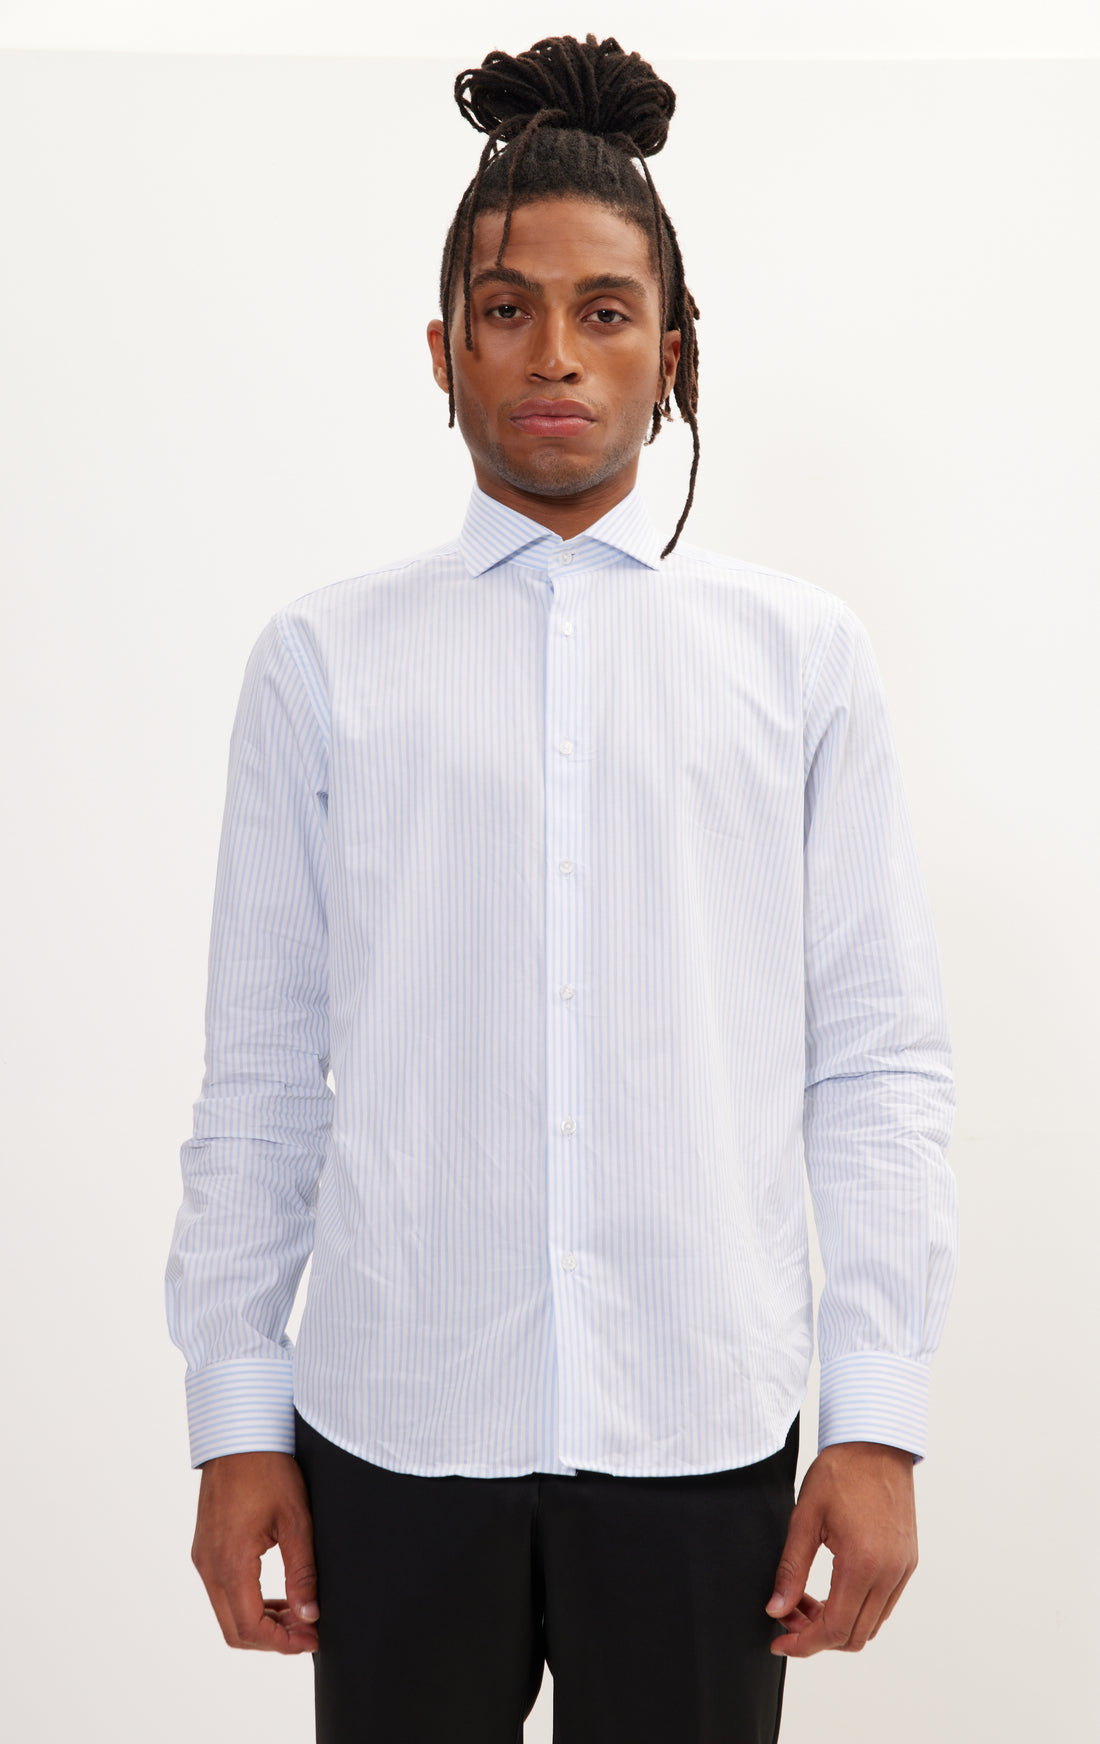 N° AN4903 PURE COTTON FRENCH PLACKET SPREAD COLLAR DRESS SHIRT - WHITE BLUE BENGAL STRIPES